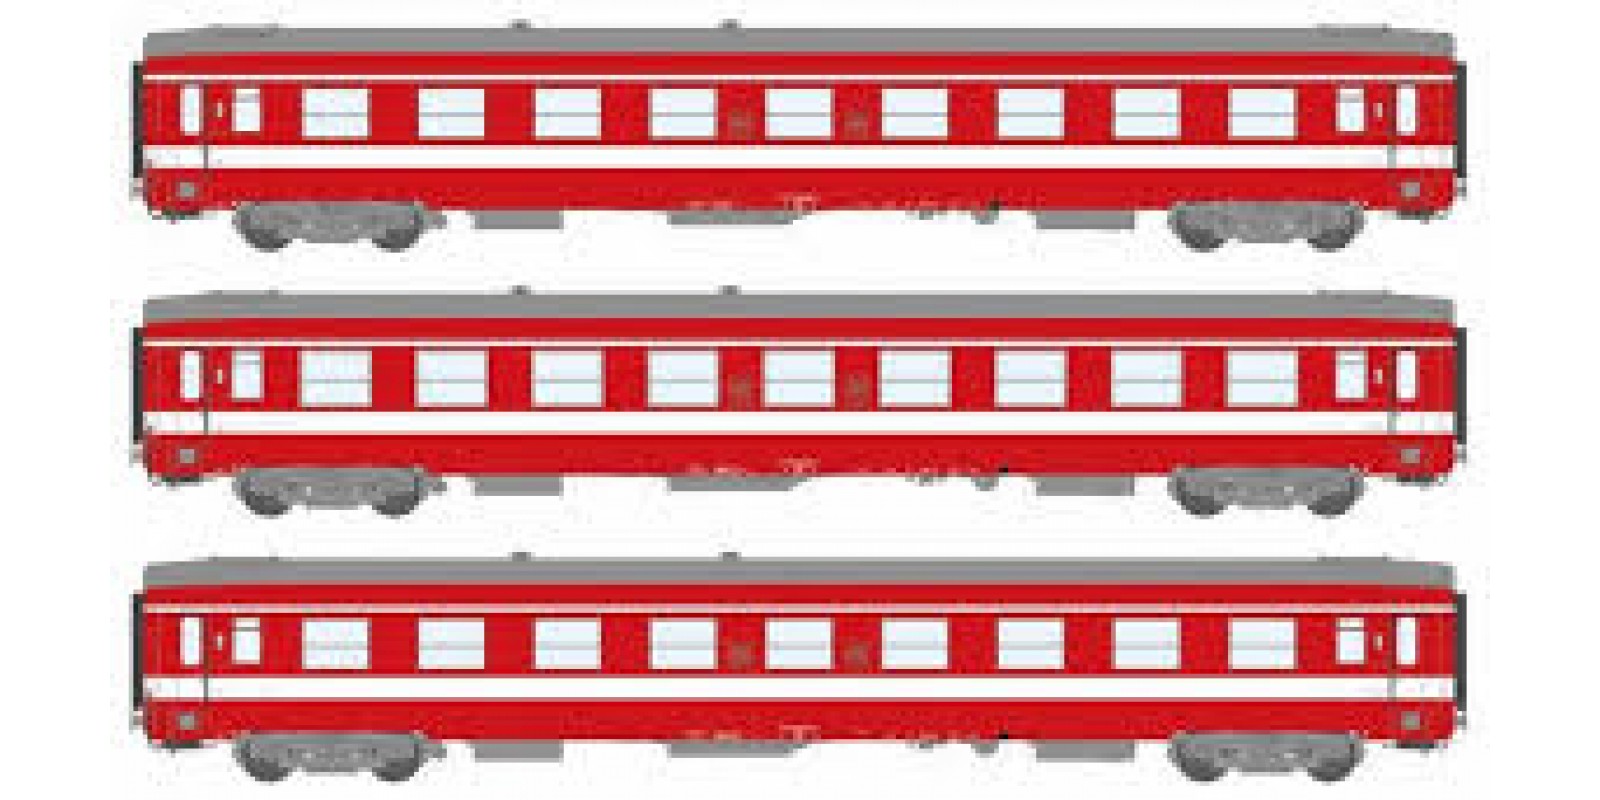 REVB105 SET of 3 UIC CARS (3 x A9) Red - Reserved Capitol Era IV